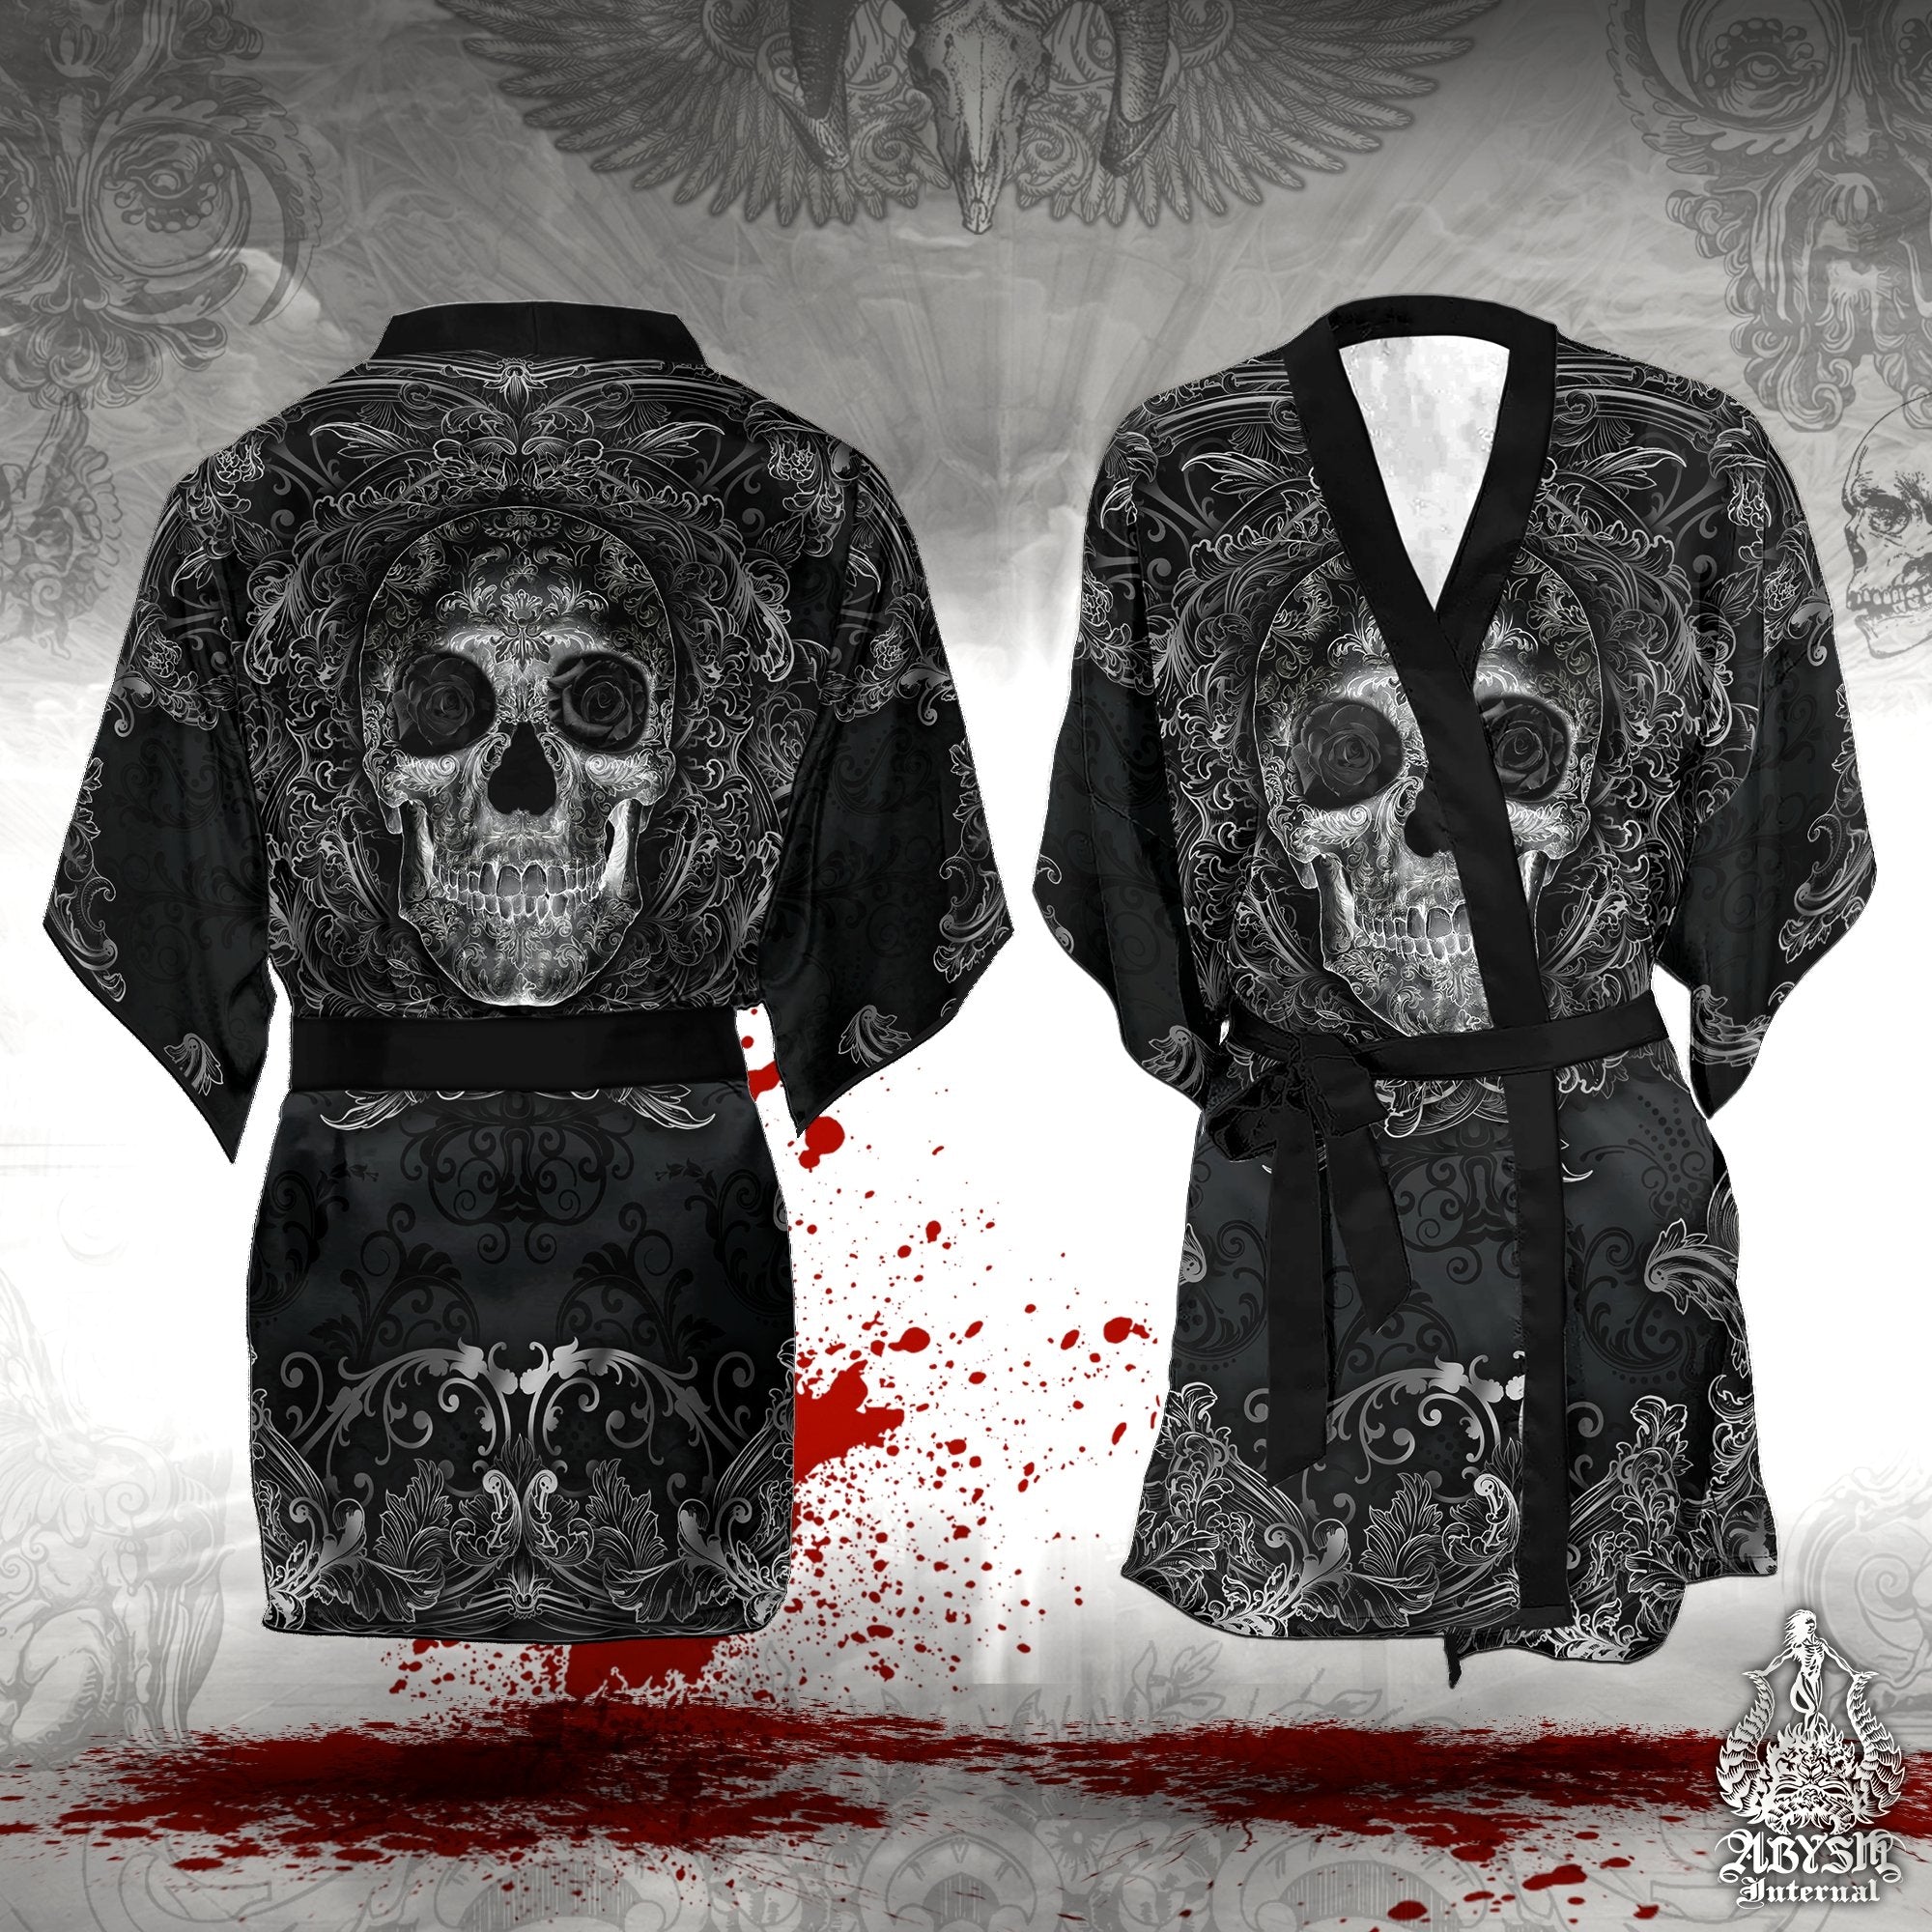 Skull Cover Up, Beach Outfit, Party Kimono, Summer Festival Robe, Gothic Indie and Alternative Clothing, Unisex - Dark - Abysm Internal